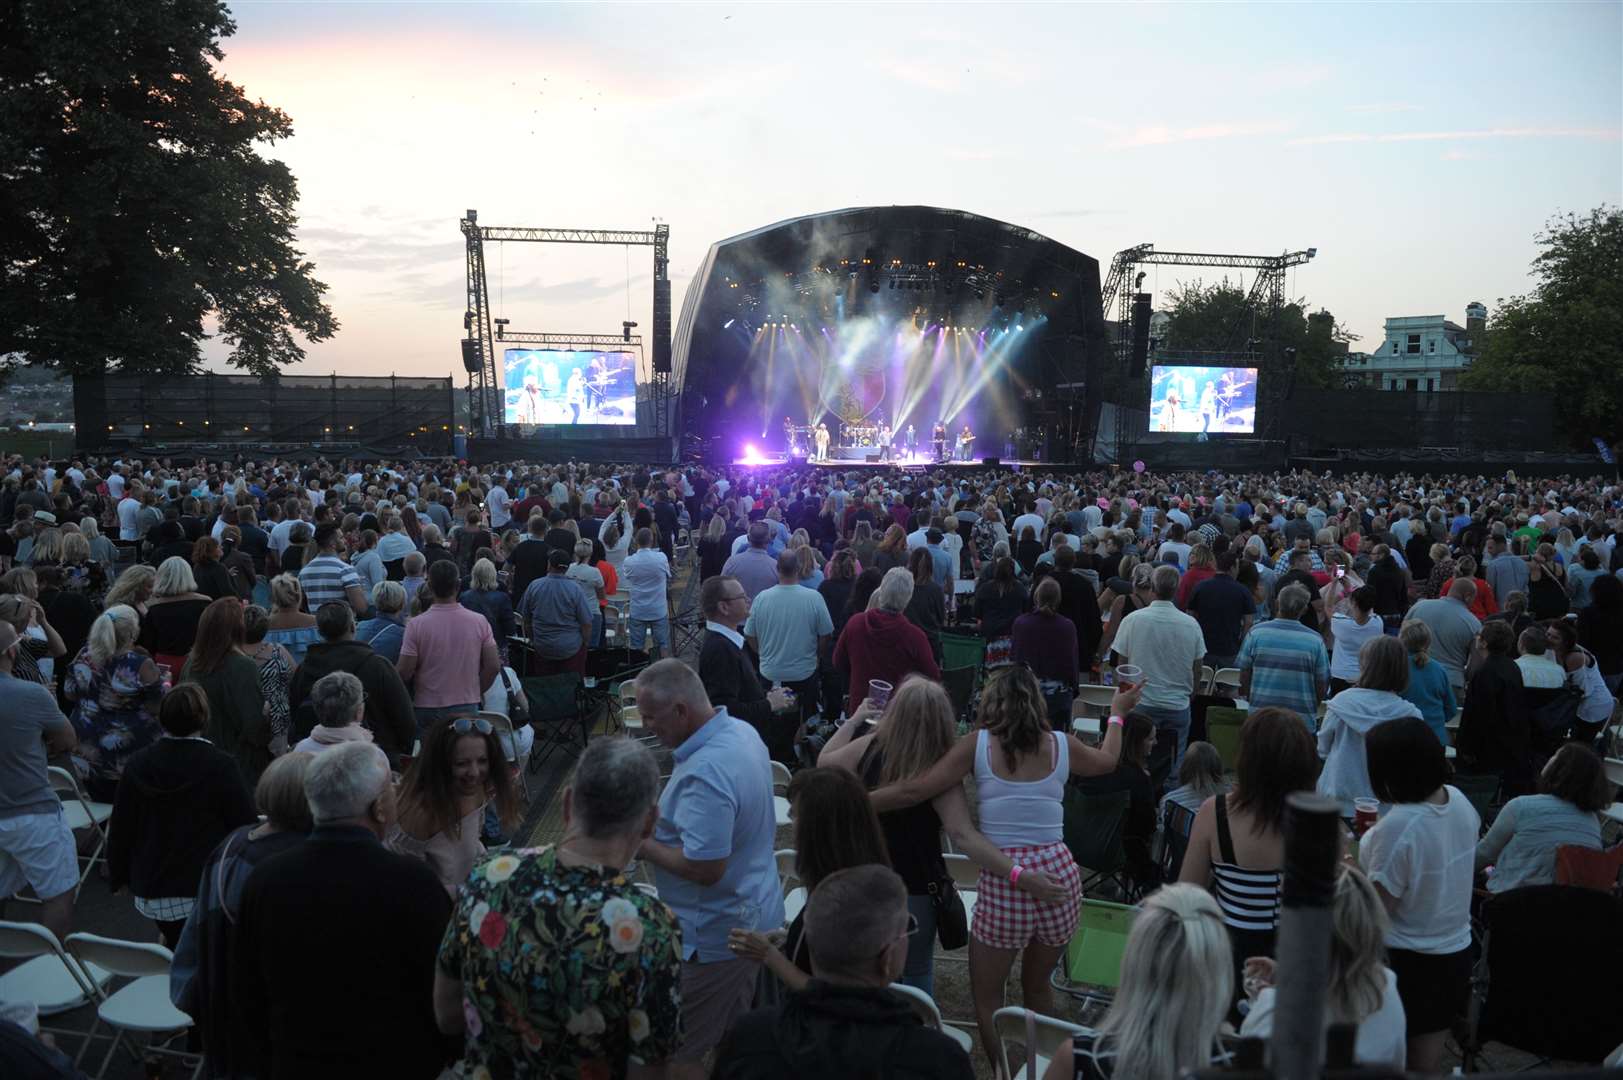 UB40 performing at the Rochester Castle Concert in 2018. Picture: Steve Crispe